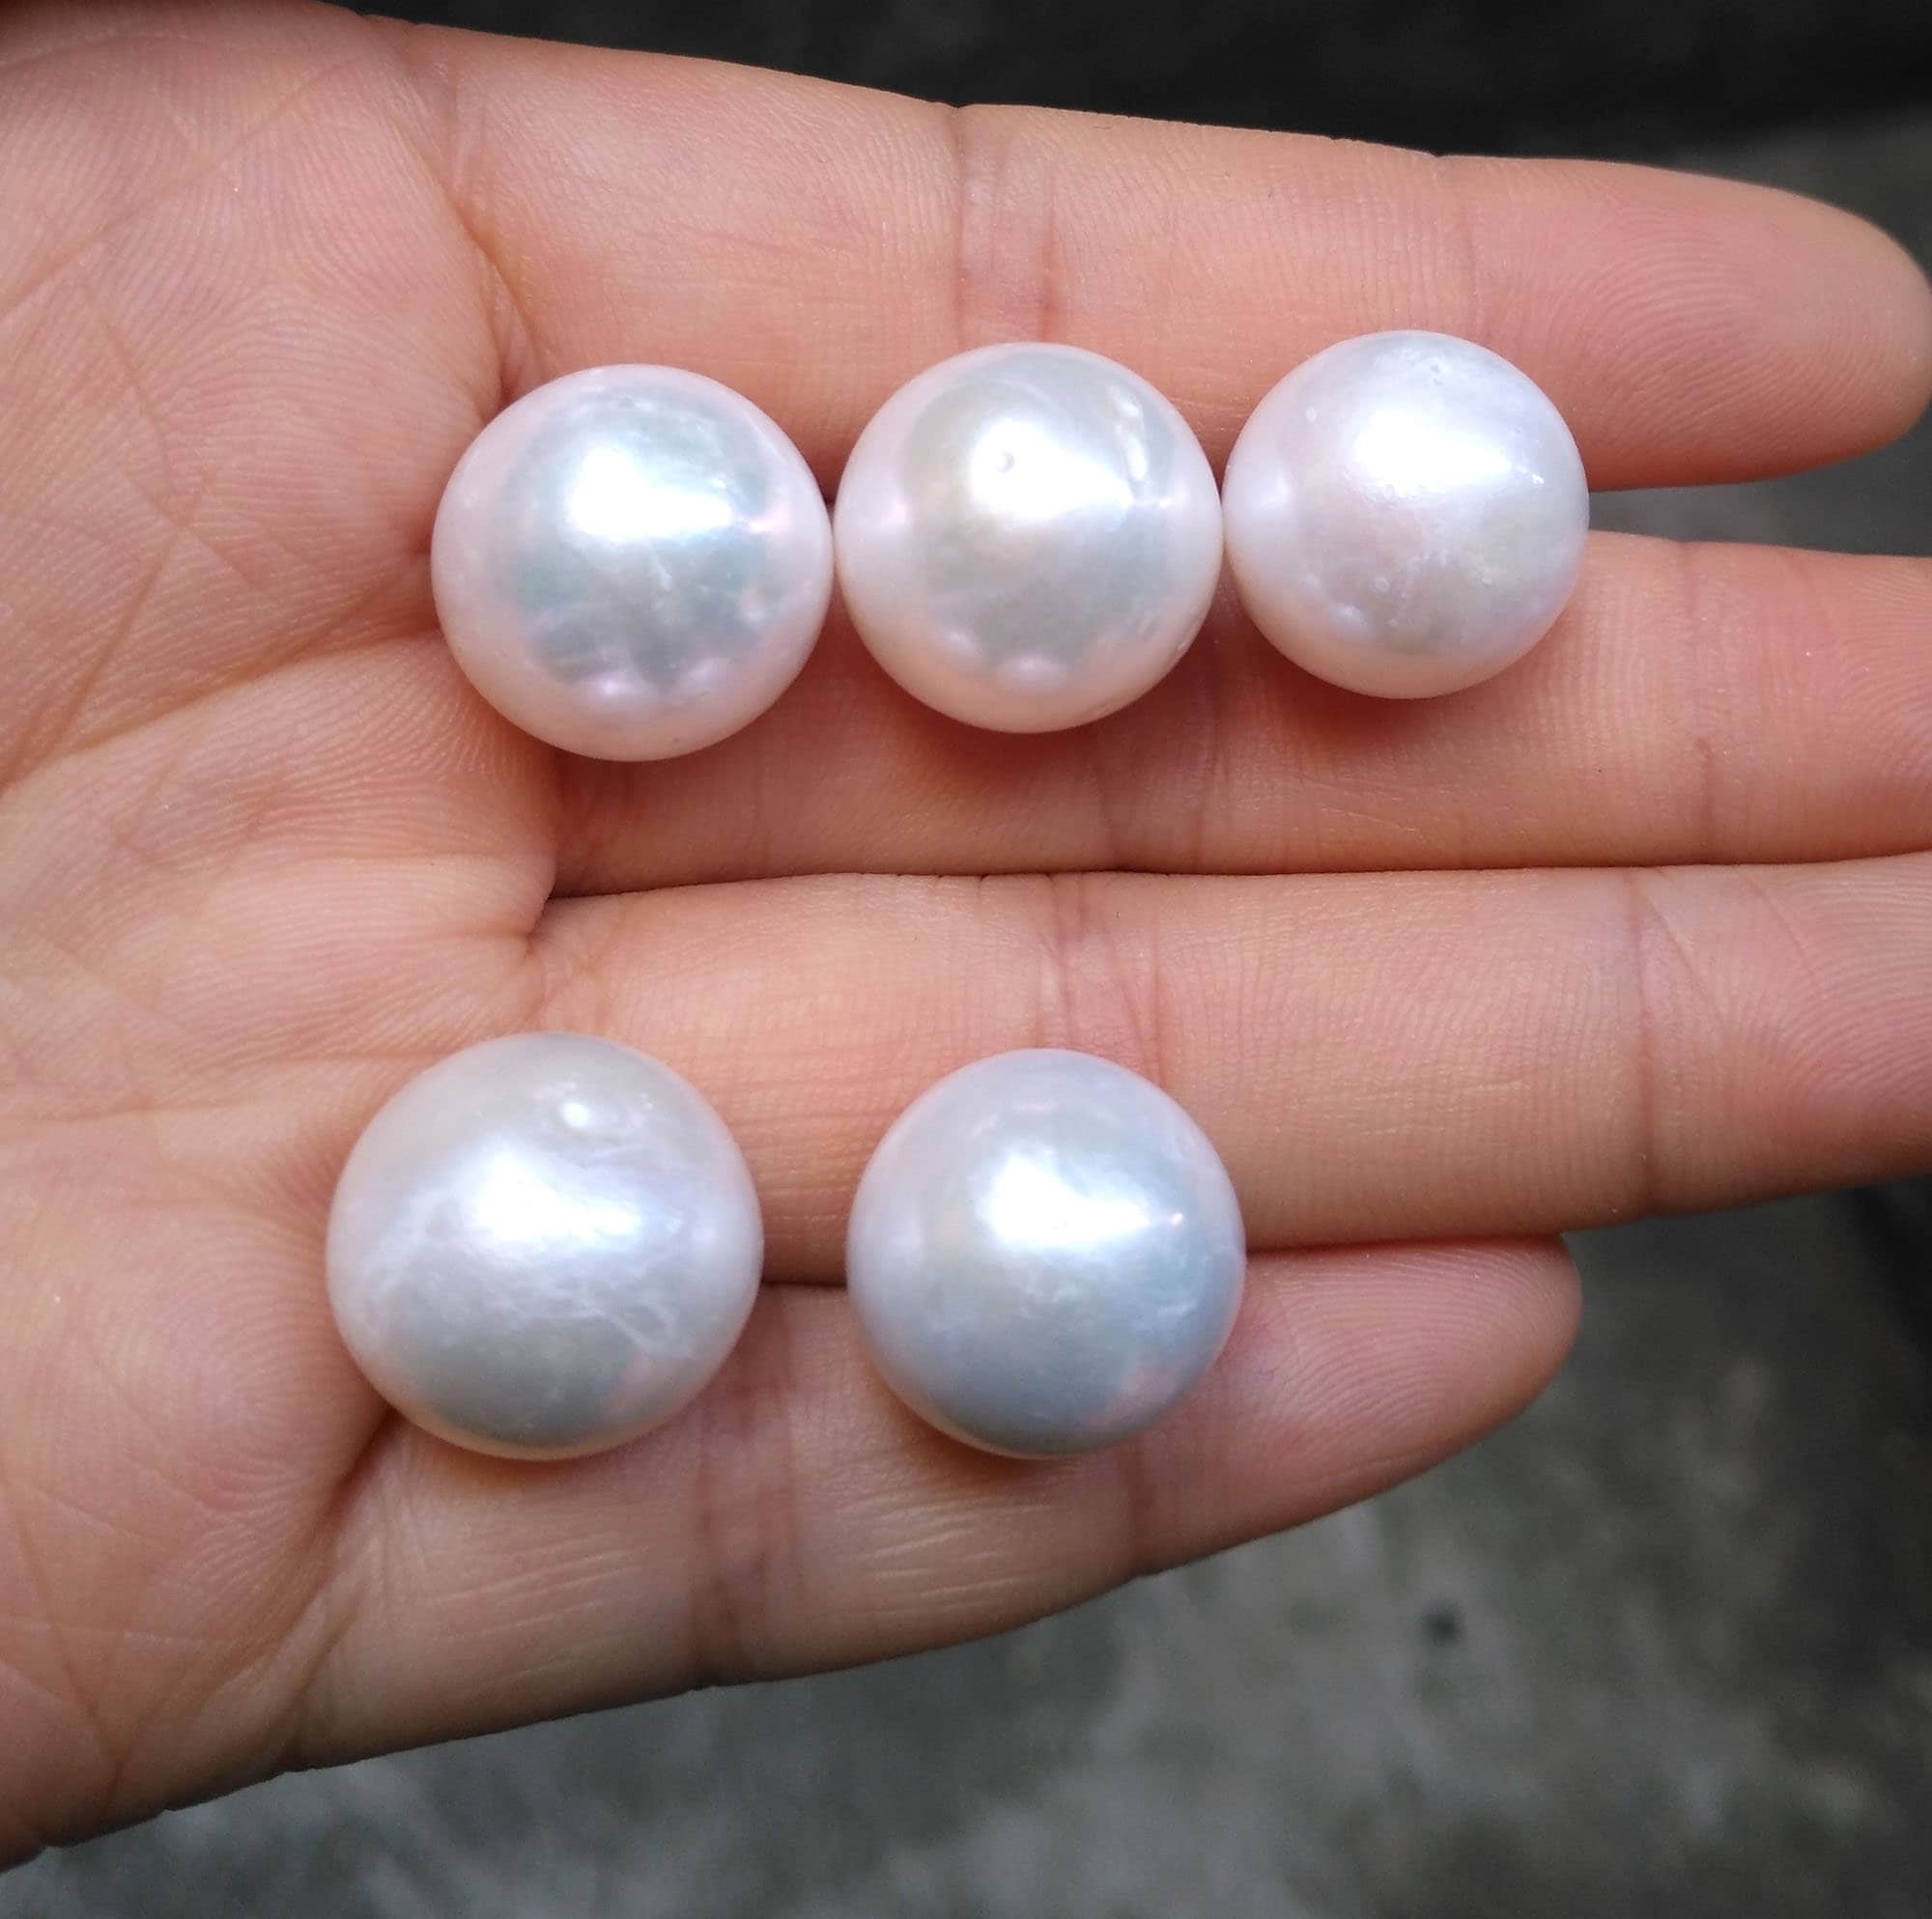 11-12mm Large Near Round AAA Pearl Undrilled Or Half Drilled